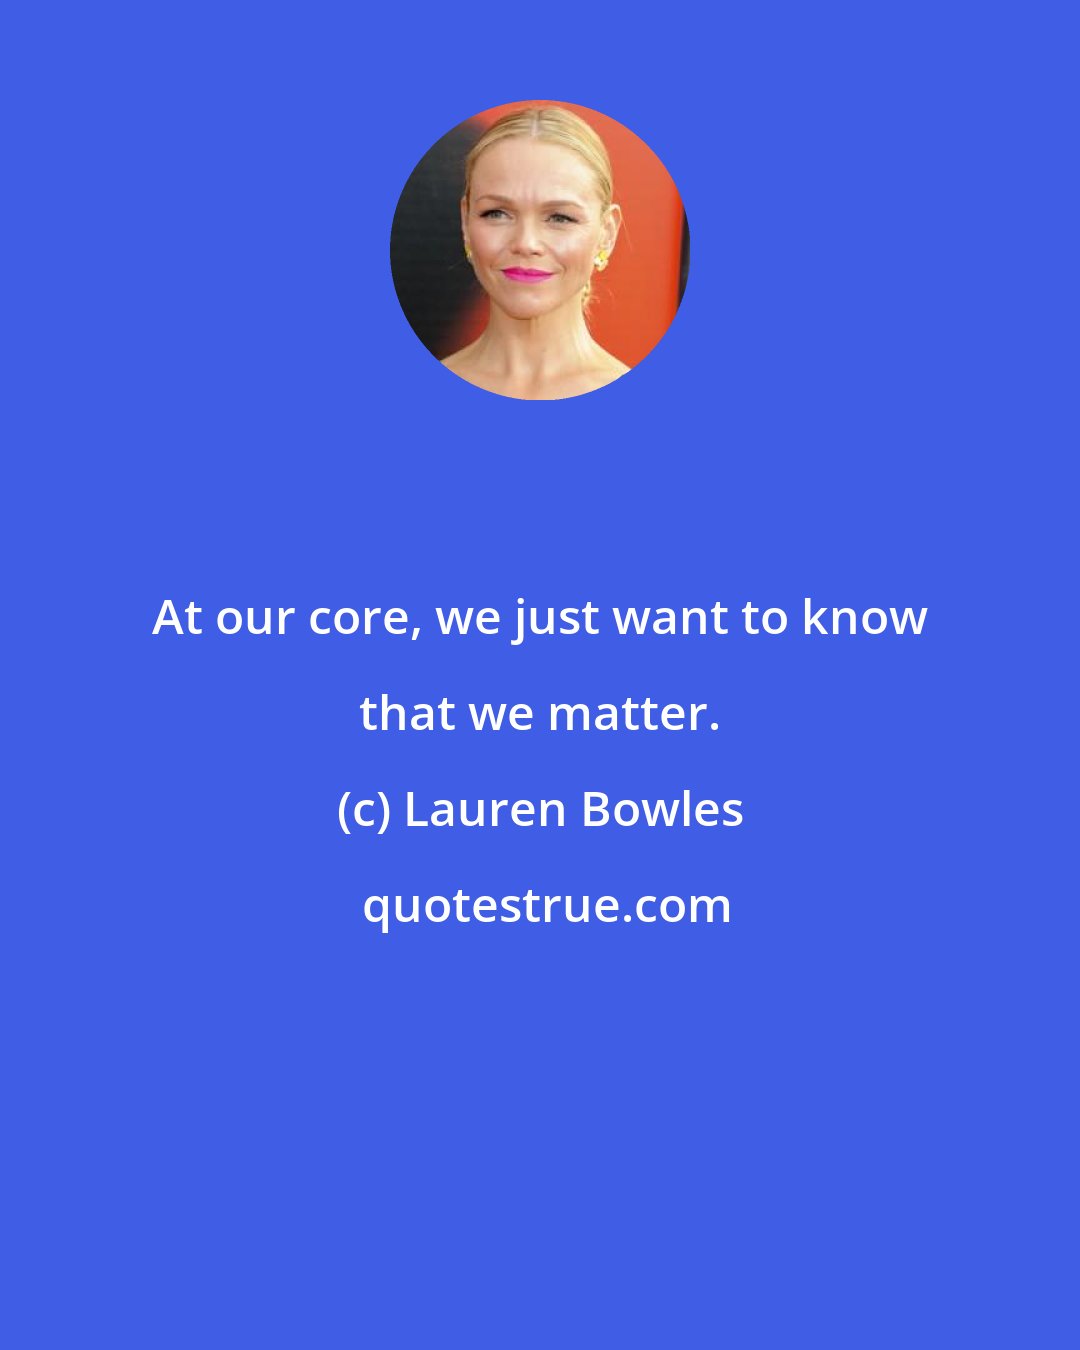 Lauren Bowles: At our core, we just want to know that we matter.